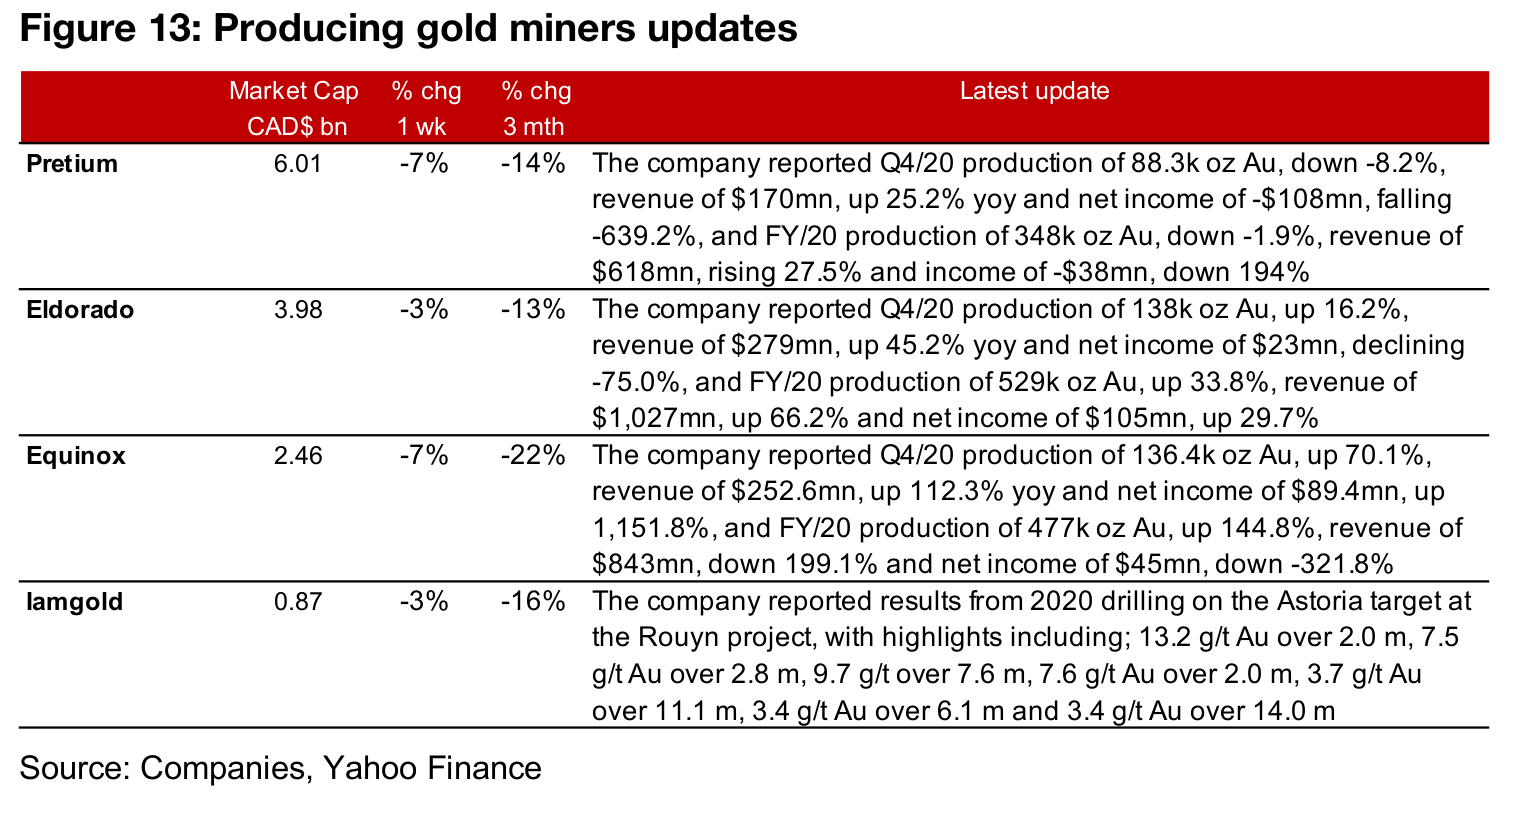 Producers drop on gold decline as last Q4/20 results come in